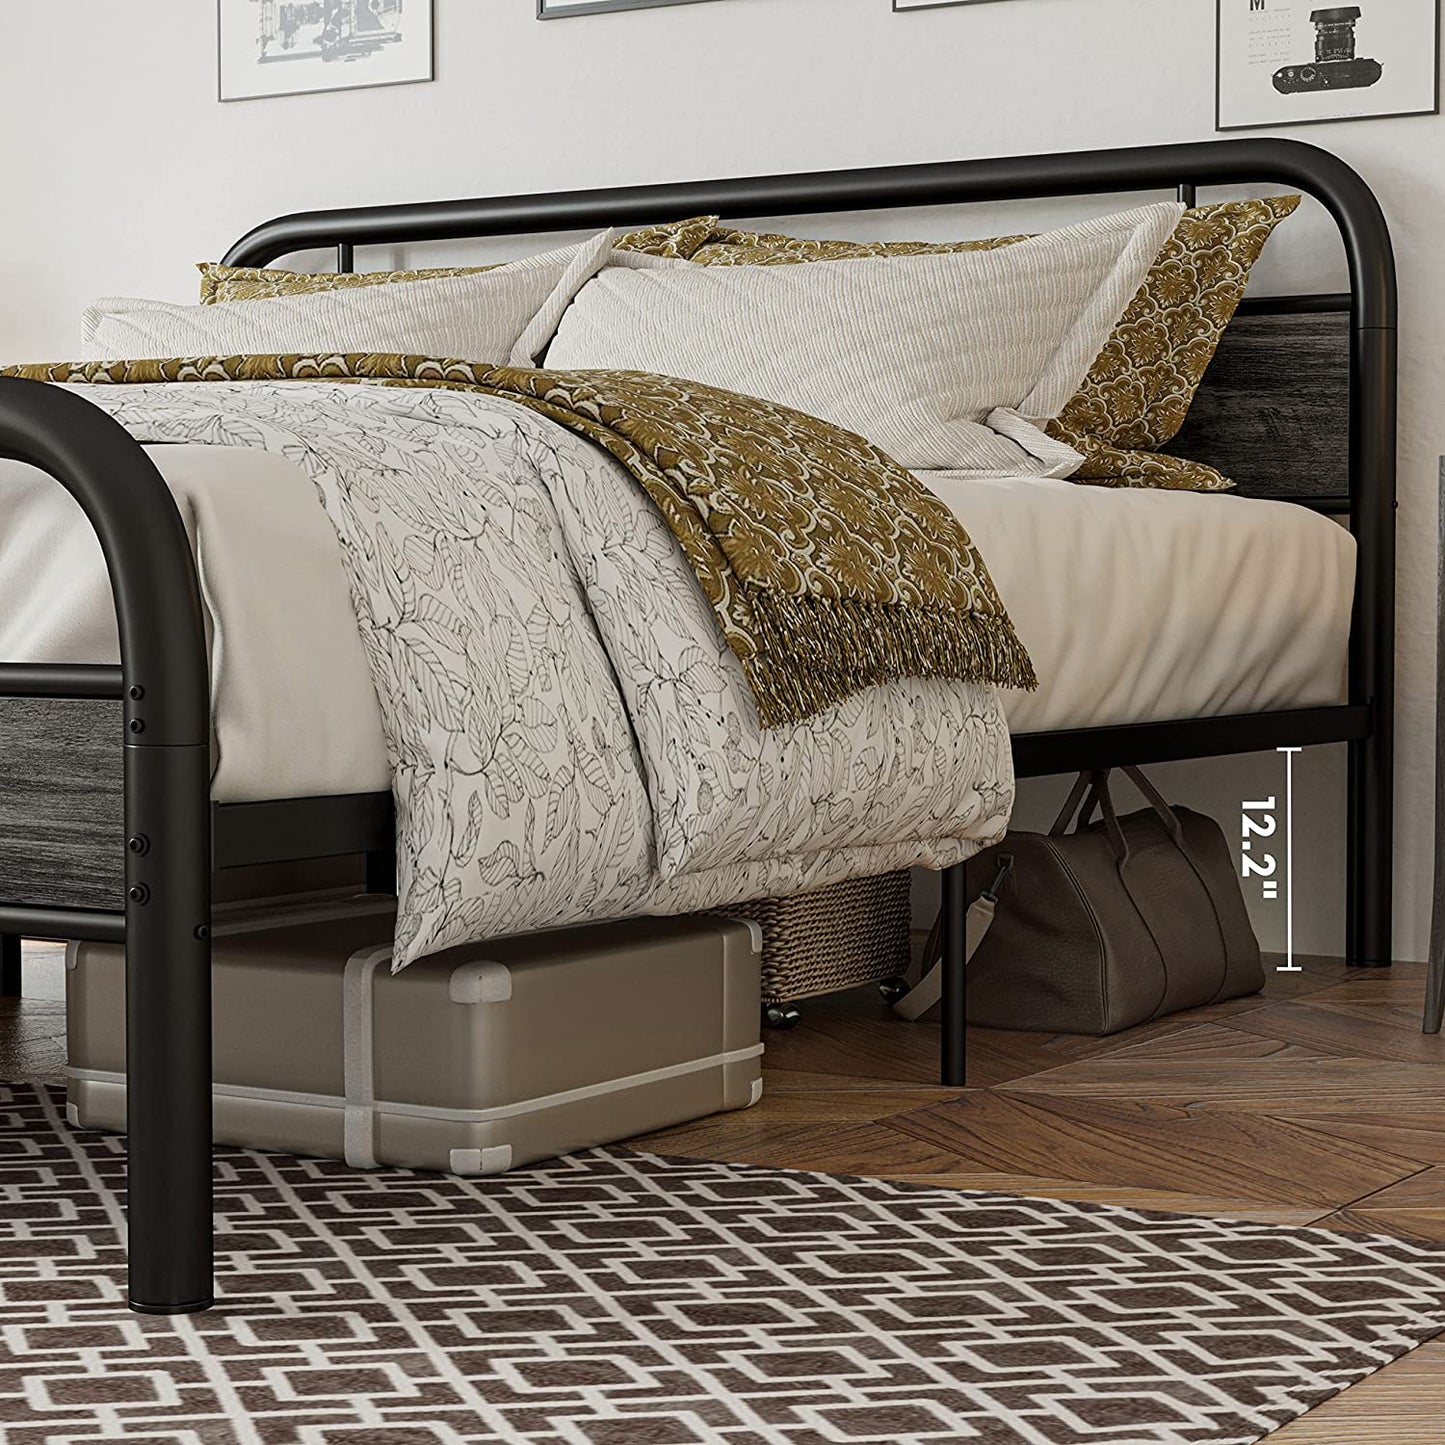 LIKIMIO California King Bed Frames Industrial Gray